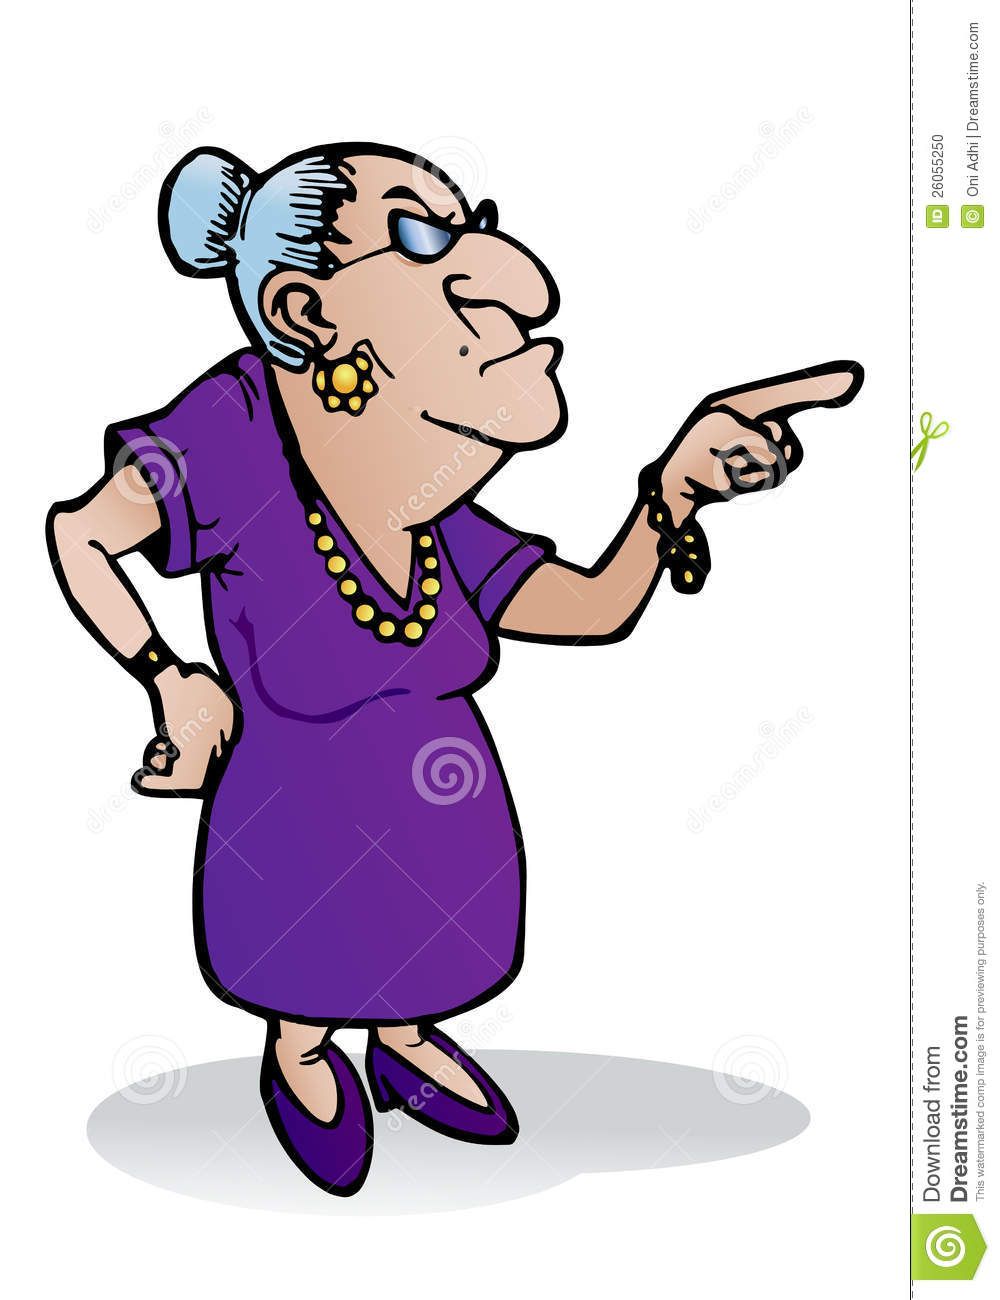 Grandmother clipart old lady. Great clip art panda